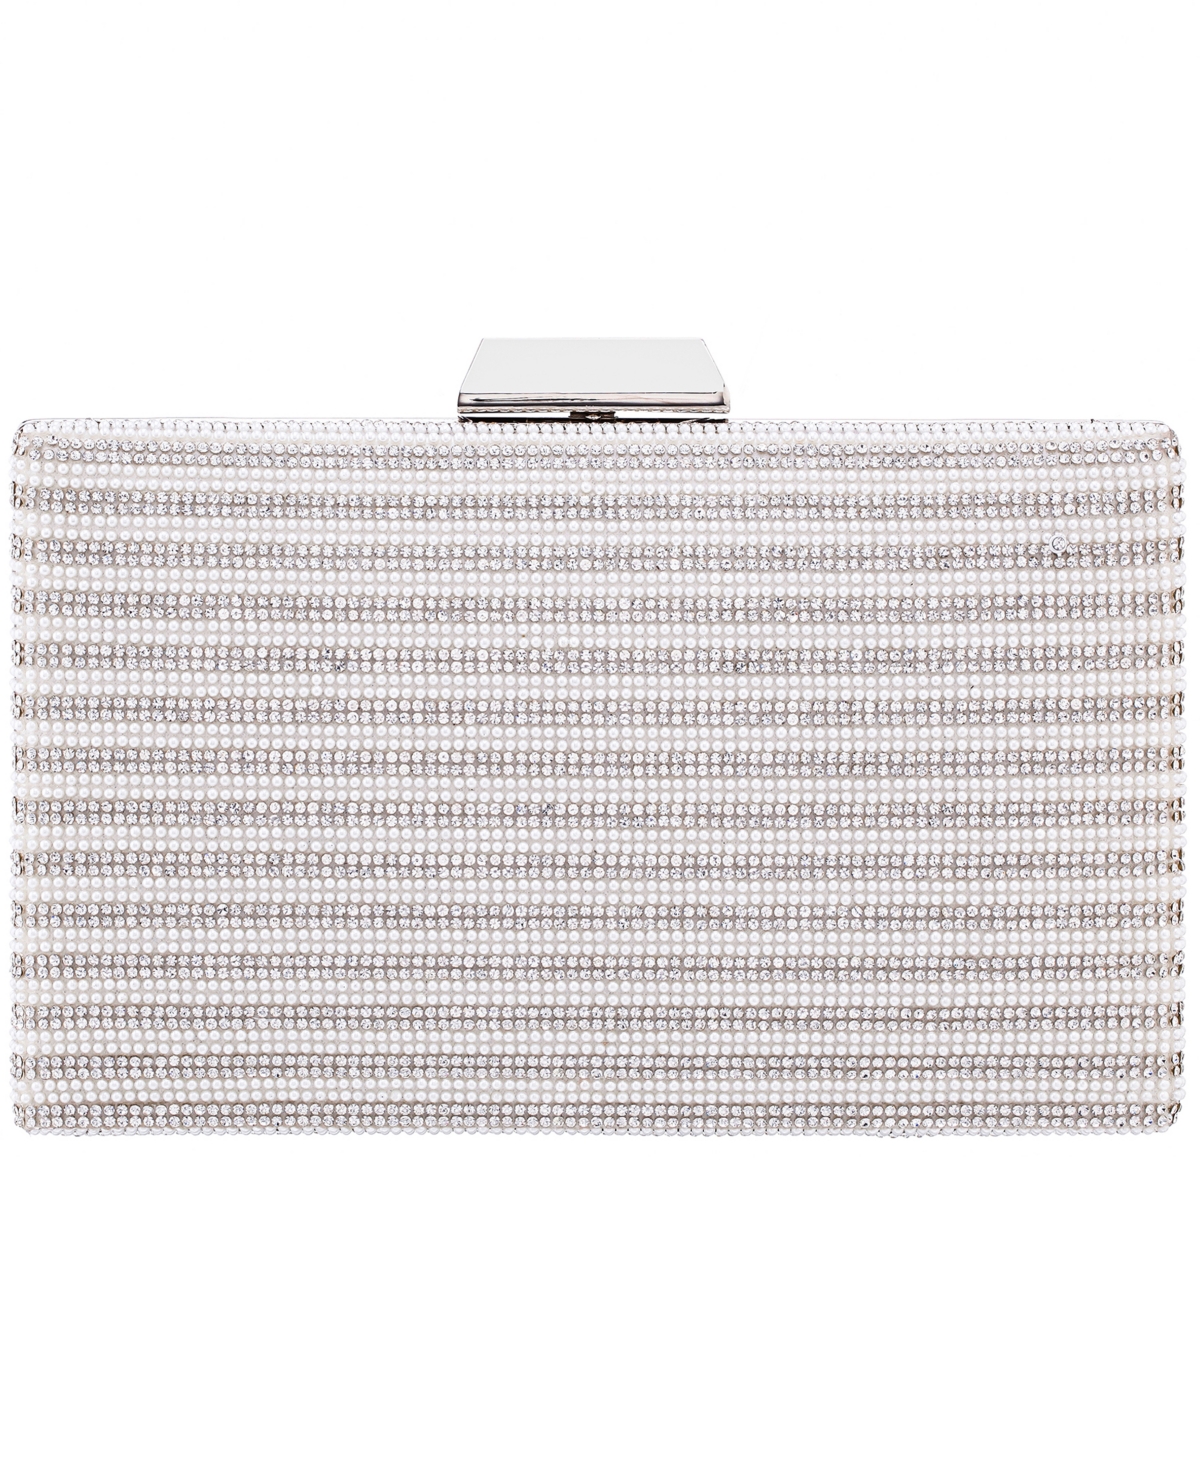 Imitation Pearl and Crystal Minaudiere Clutch - White